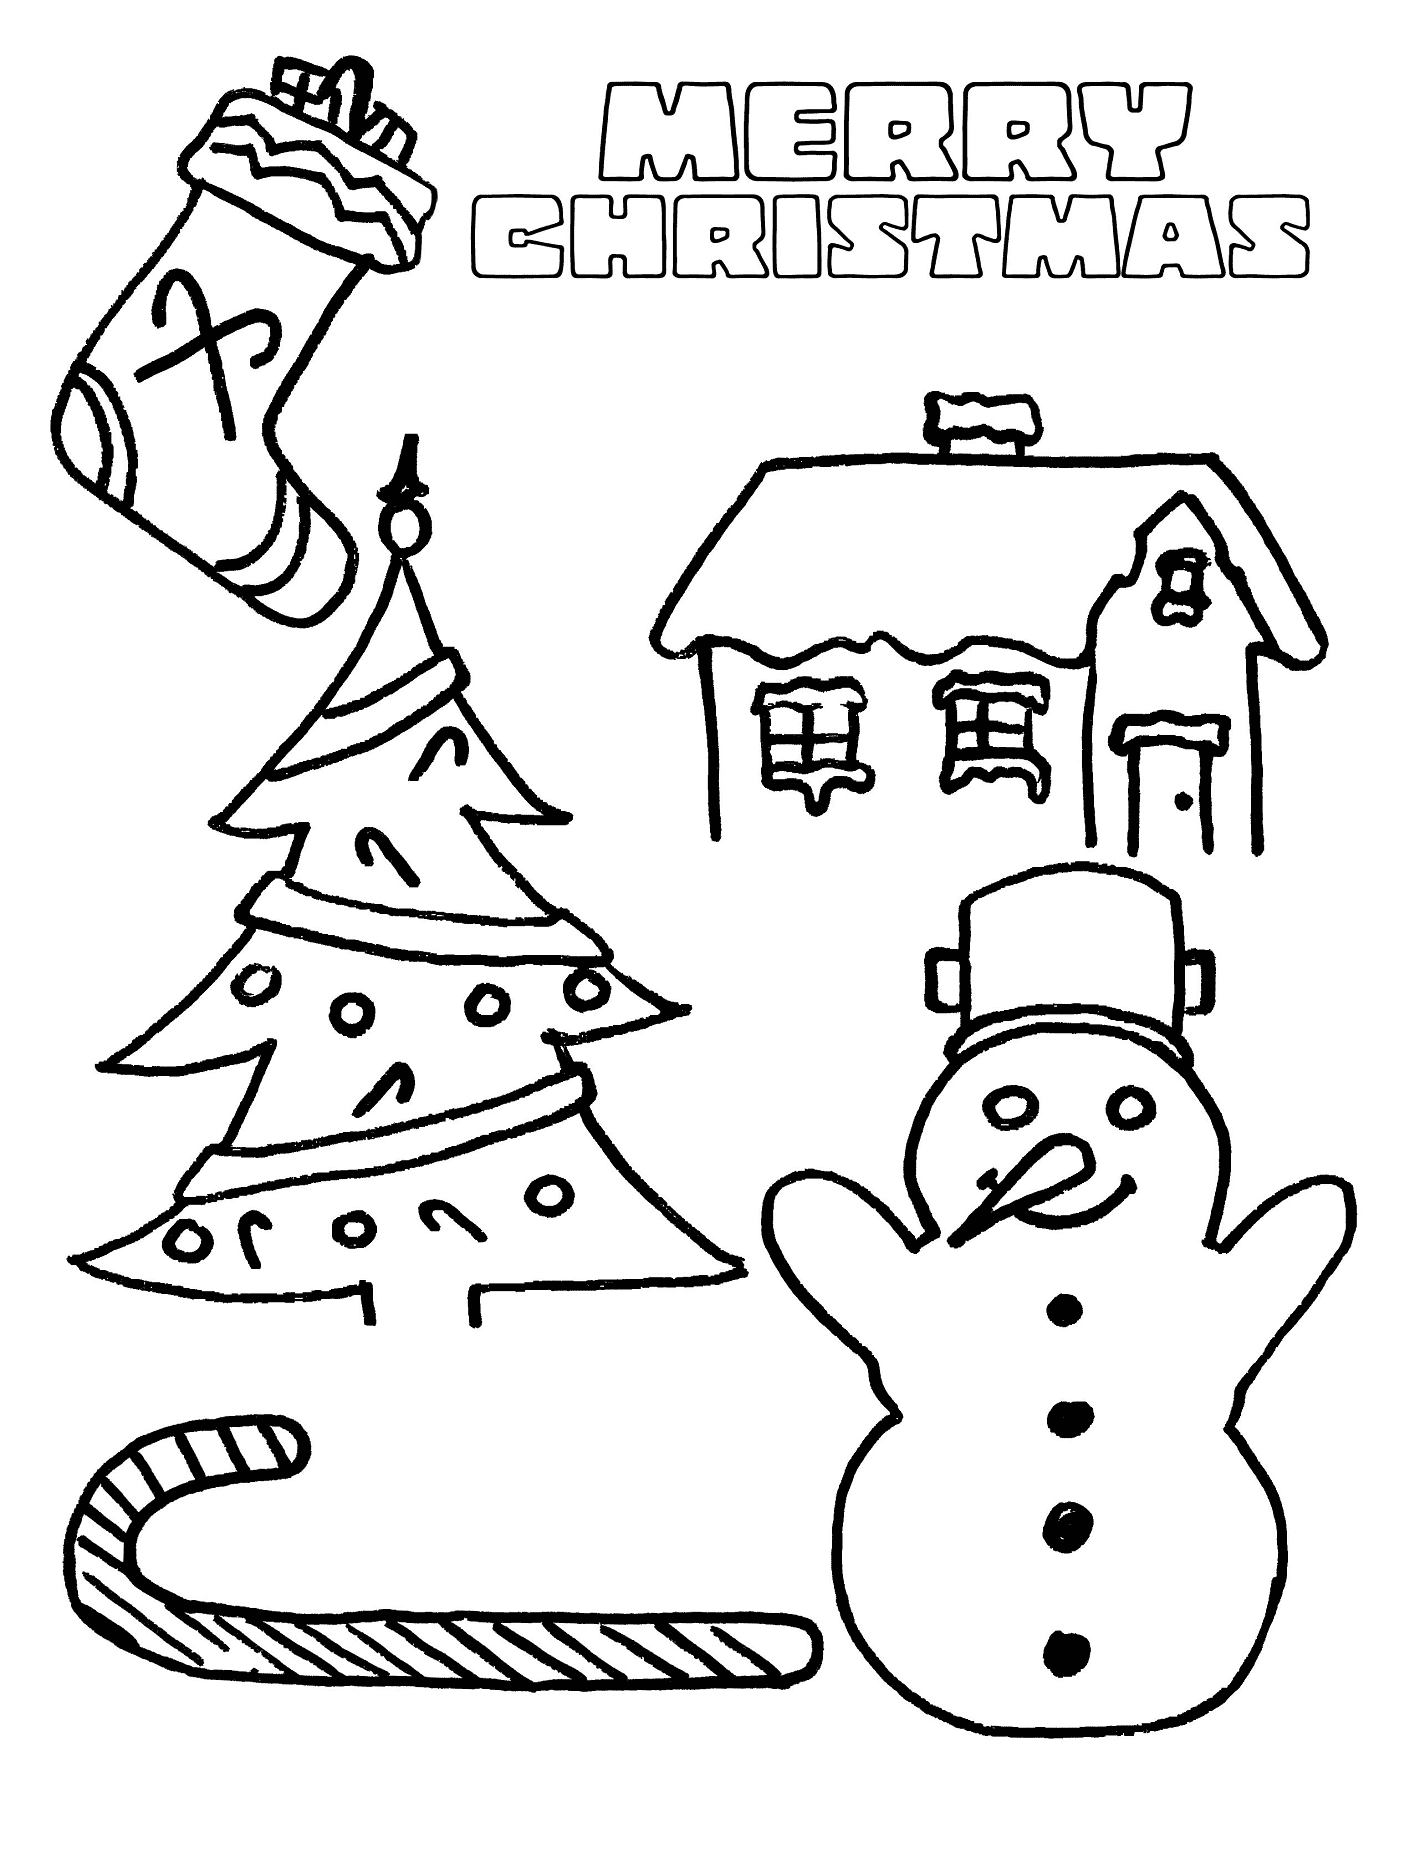 Merry Christmas Card Free Coloring Page